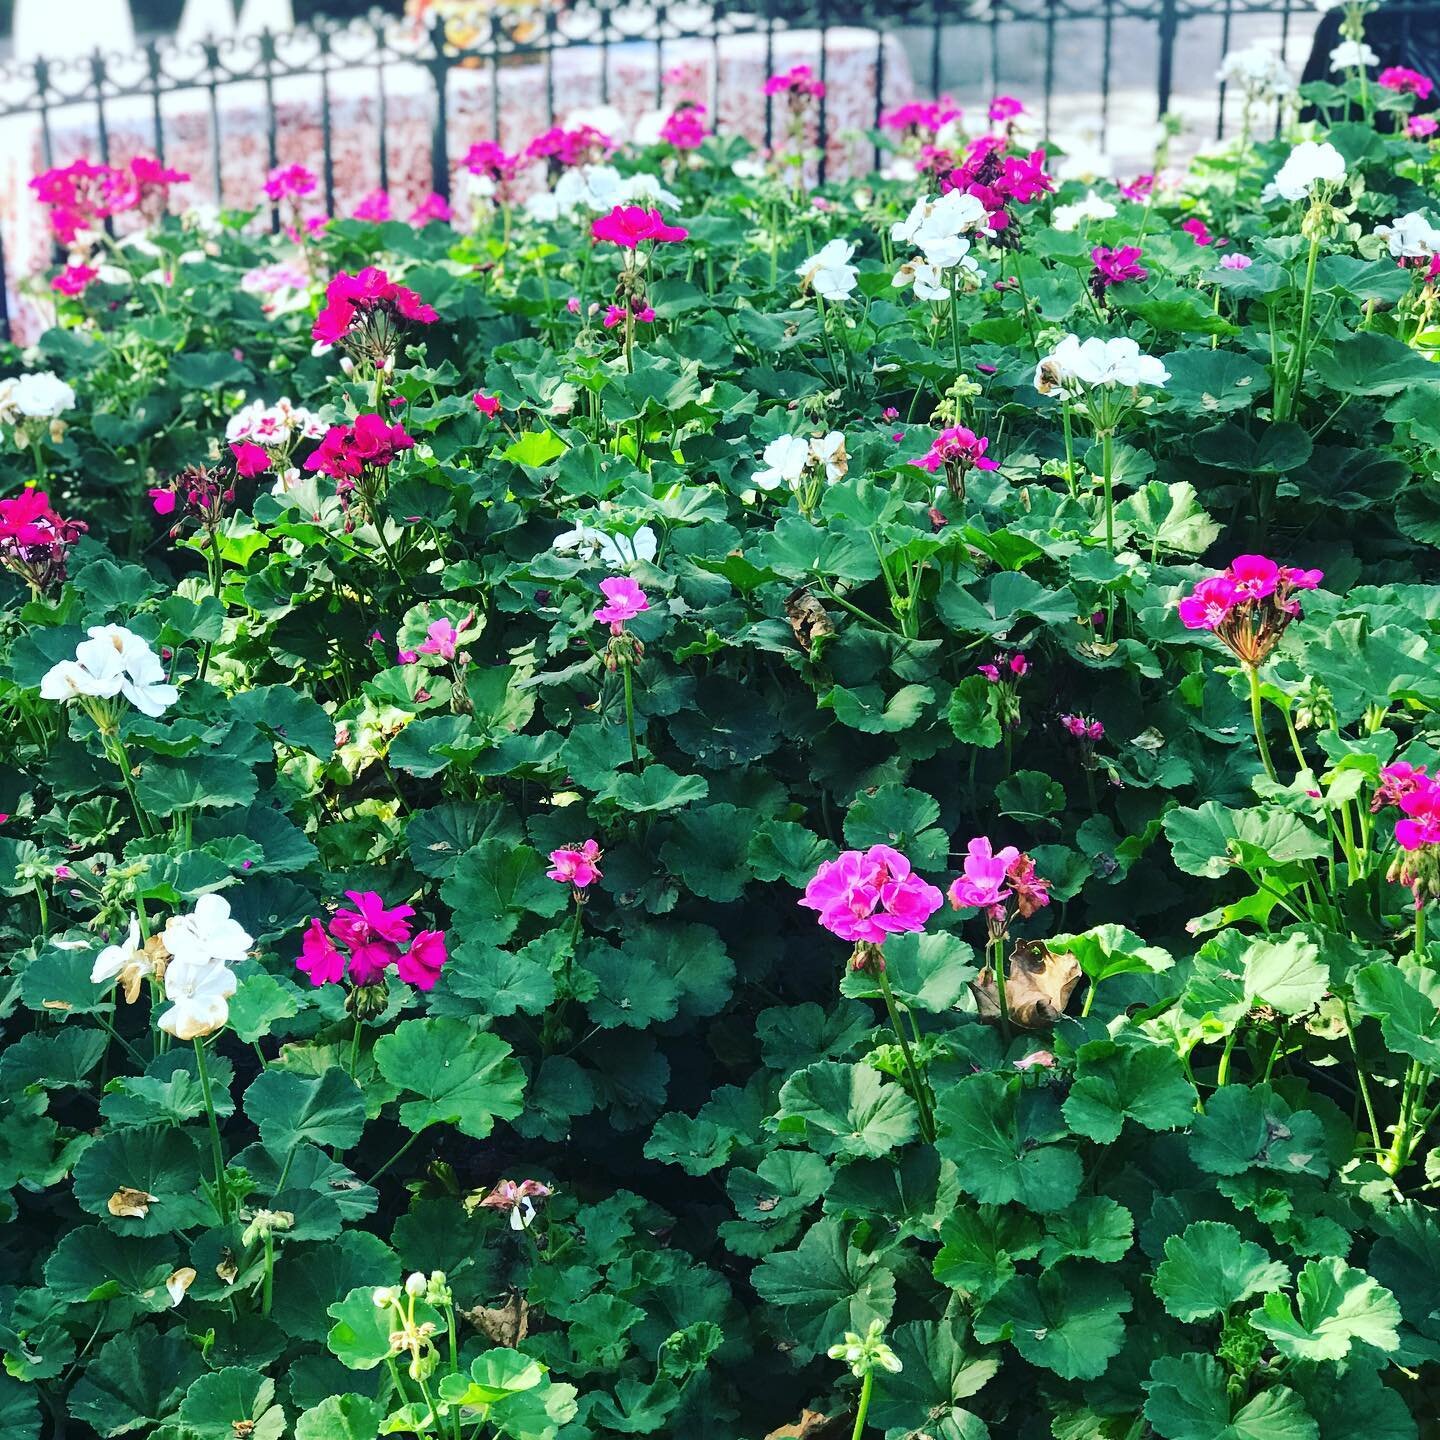 Tomorrow (Saturday) Hayes Park volunteers will be removing the beautiful geraniums to prepare the center bed for the winter season. If you would like to take home a little piece of Hayes Park 🌸to bloom in your garden next summer, please come by with